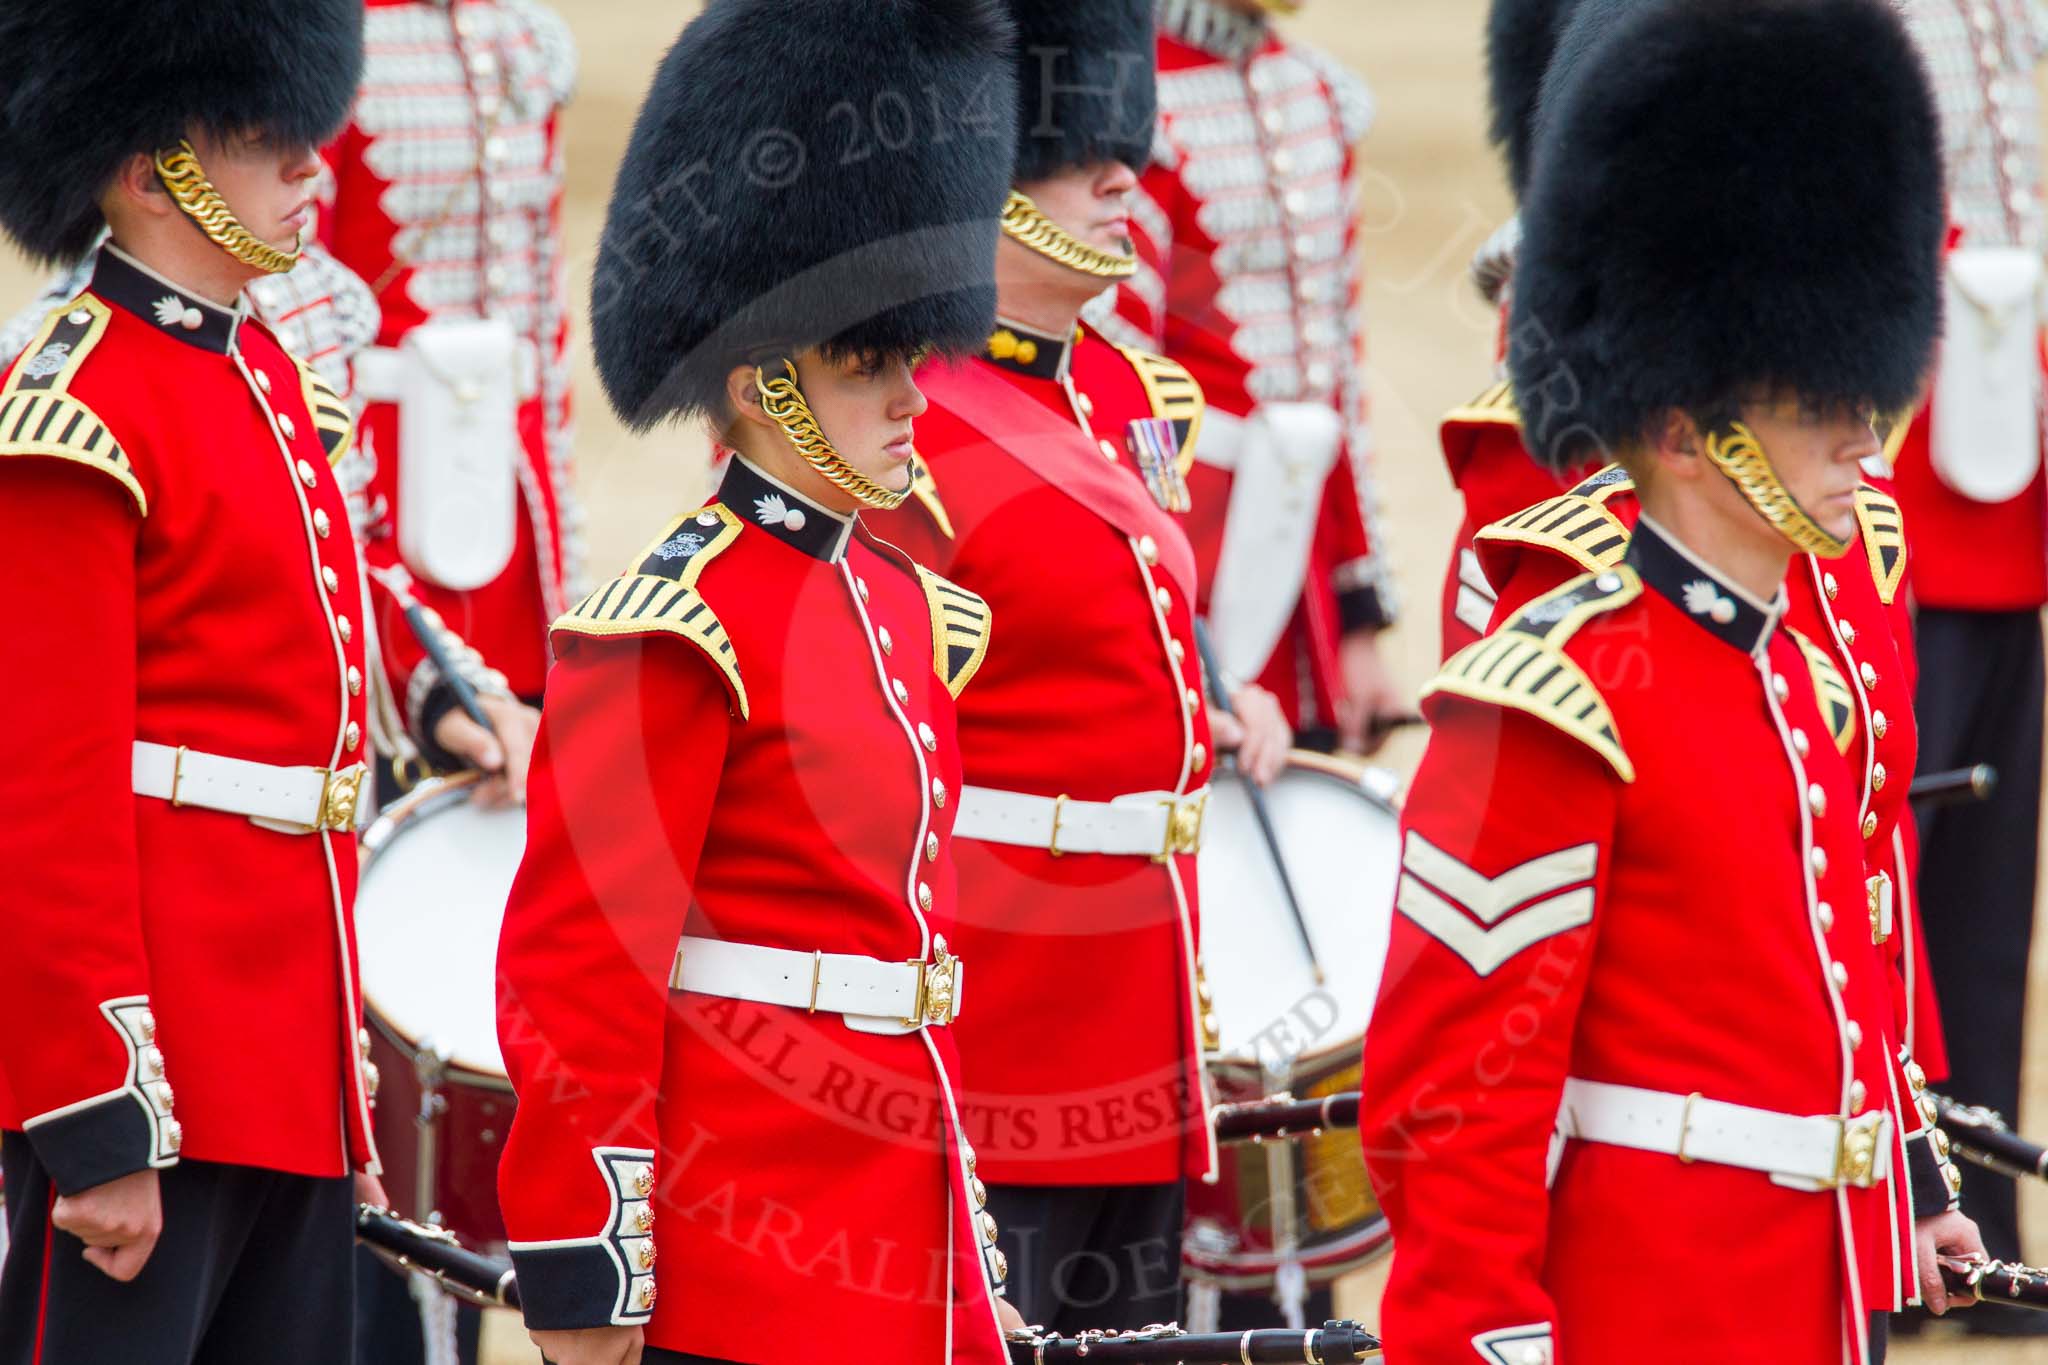 Trooping the Colour 2014.
Horse Guards Parade, Westminster,
London SW1A,

United Kingdom,
on 14 June 2014 at 12:09, image #876